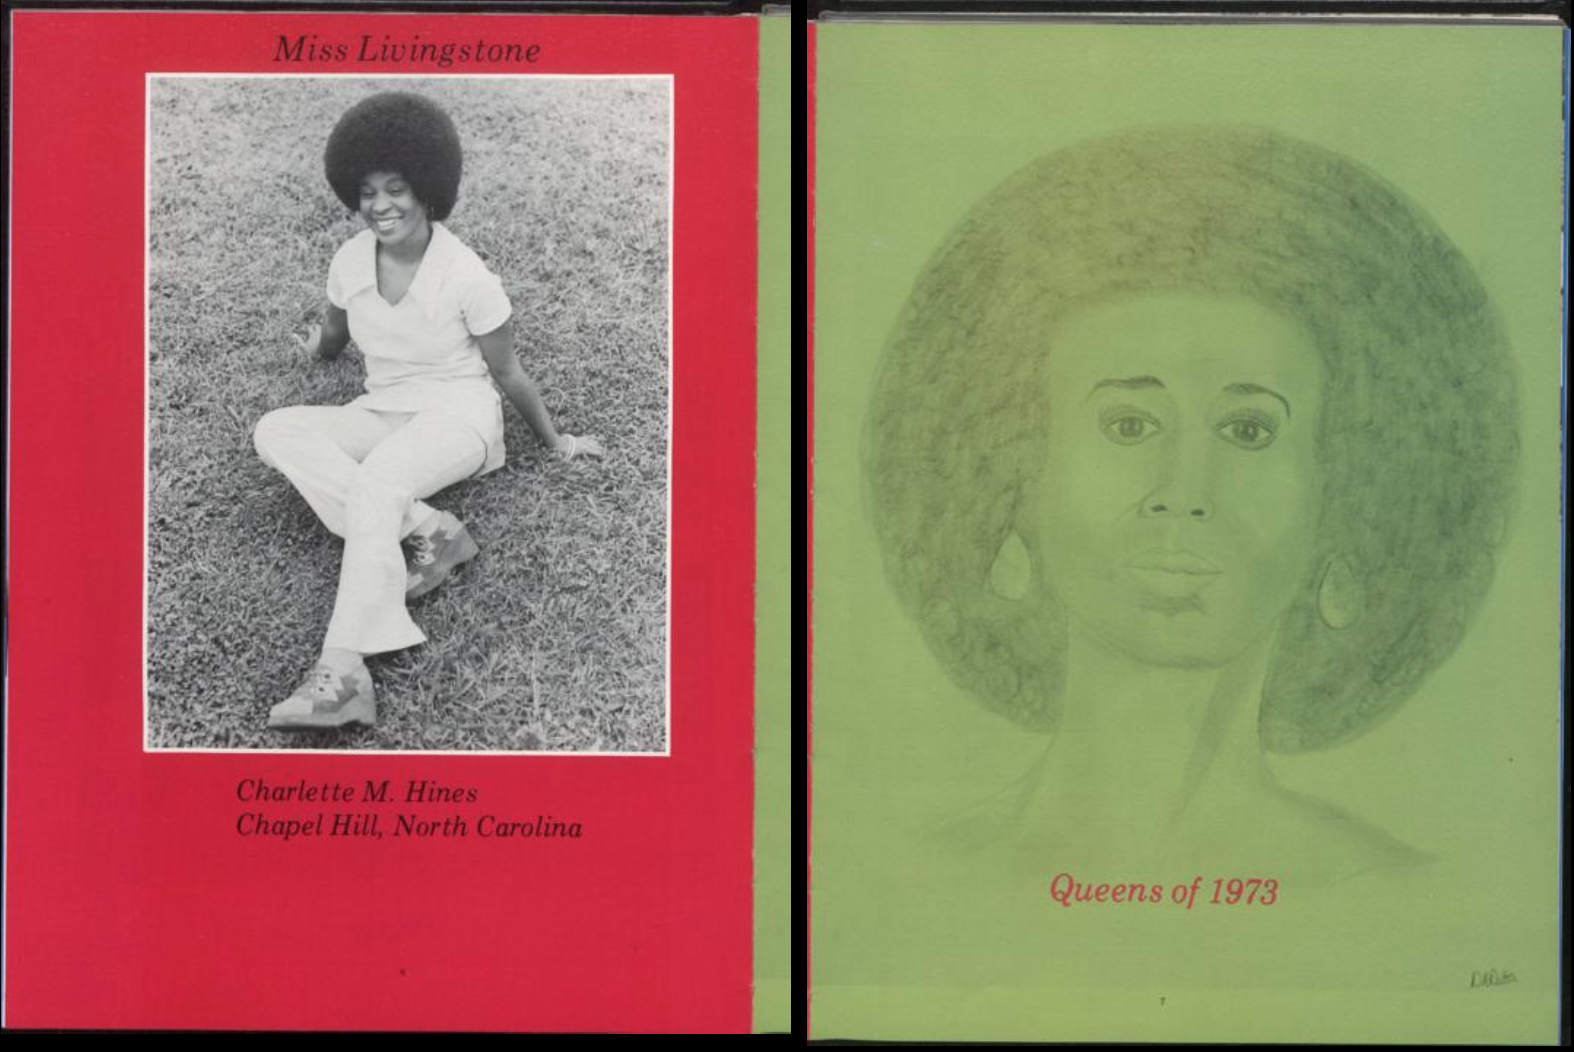 Two-page spread from the 1973 Livingstone College yearbook The Livingstonian. The left page features a black-and-white photo of Miss Livingstone, Charlette M. Hines, against a red background. The right page shows a drawing of a head of a Black woman with an afro and large earrings on a green background; the text below the drawings states "Queens of 1973".